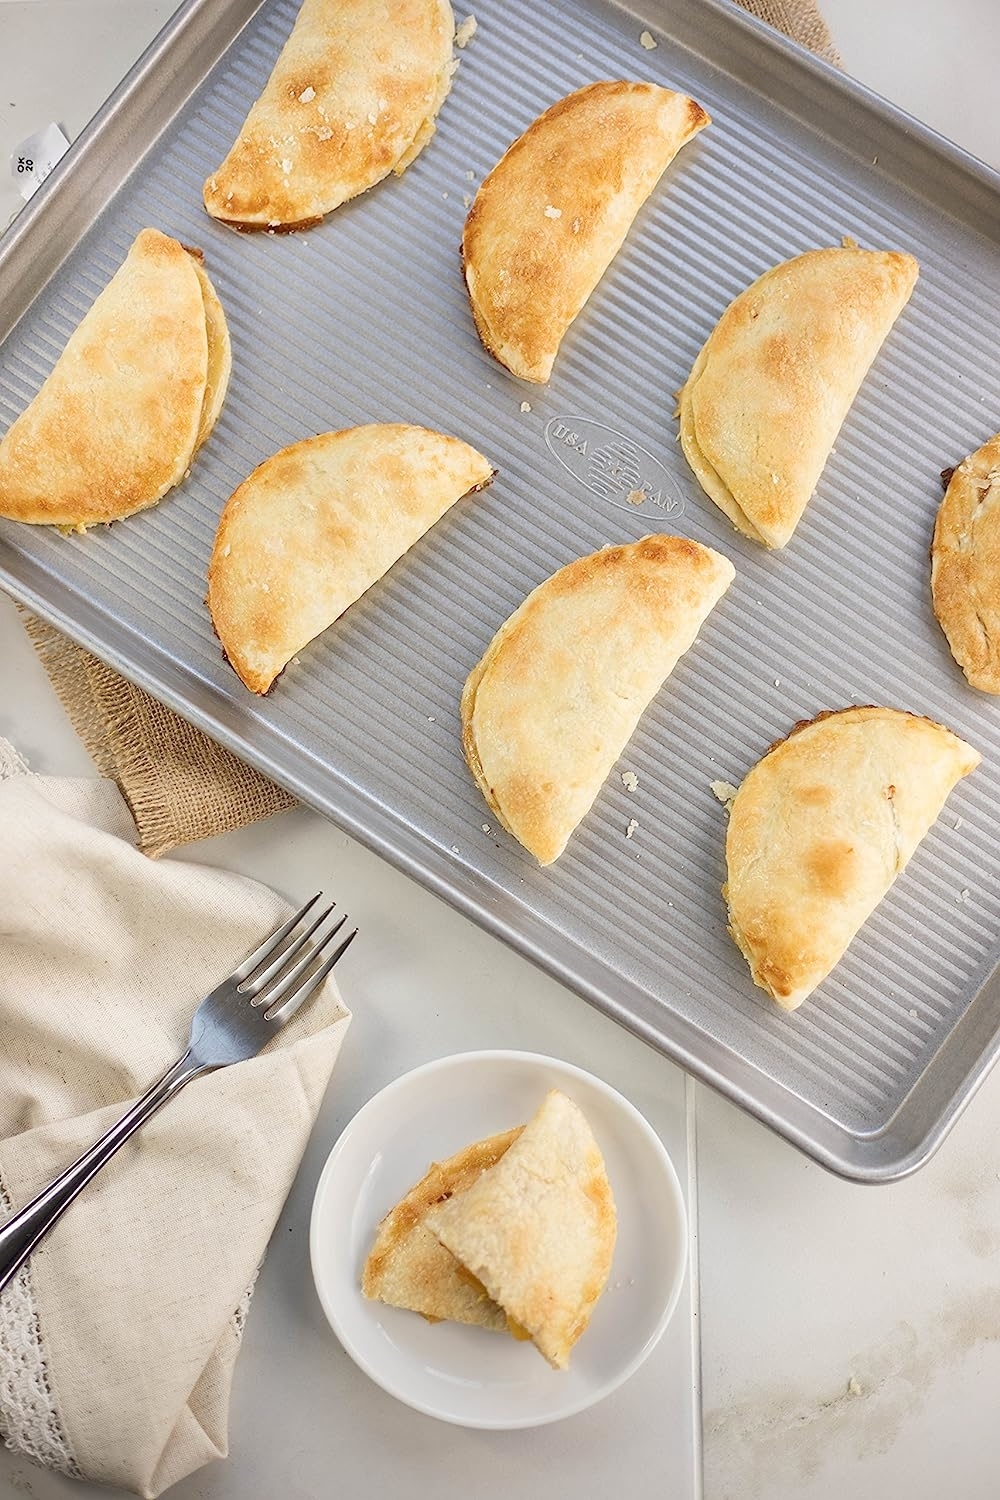 the half sheet pan with turnovers on it